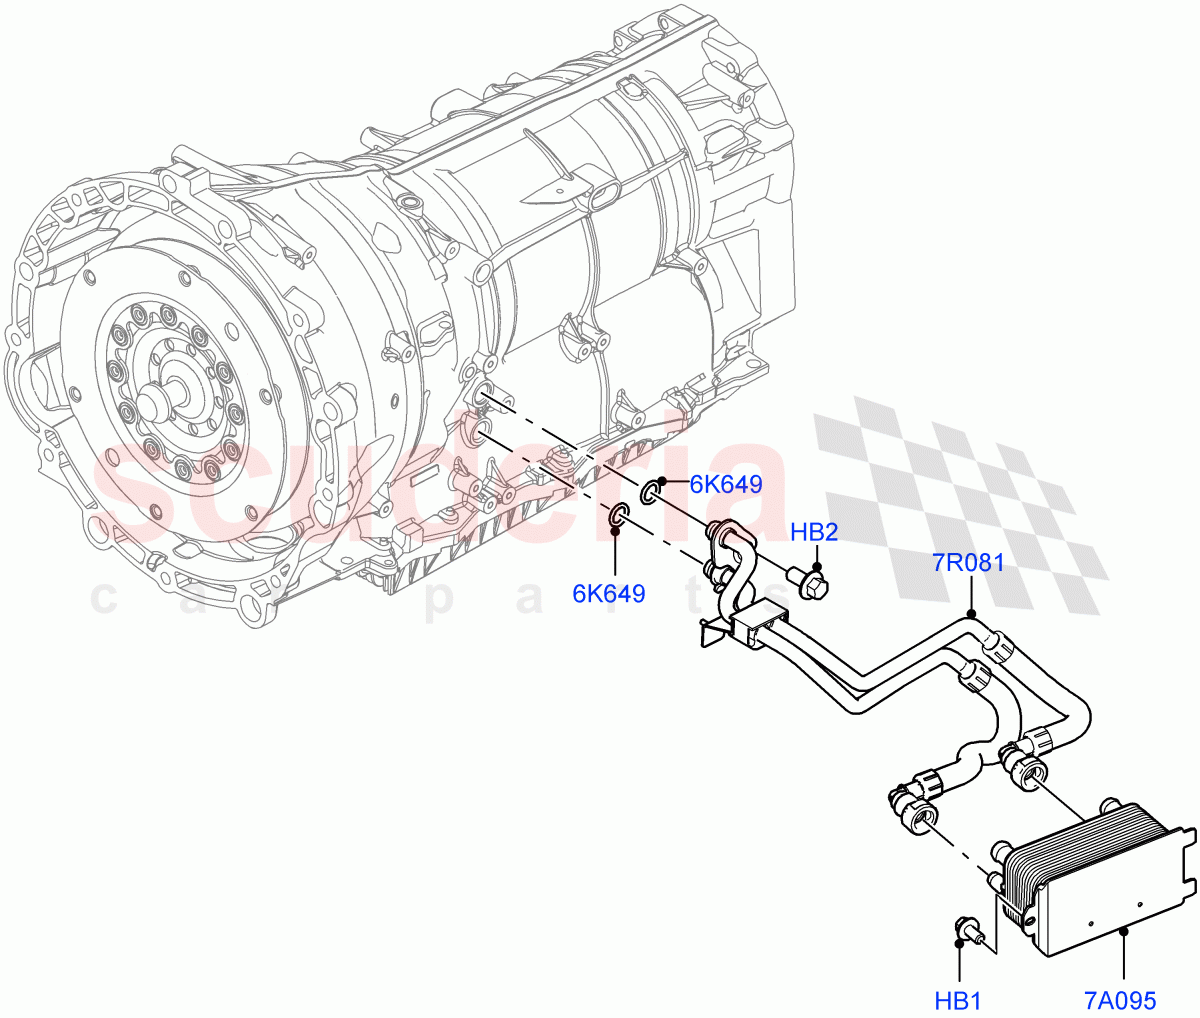 Transmission Cooling Systems(3.0L AJ20P6 Petrol High,8 Speed Auto Trans ZF 8HP76,3.0L AJ20D6 Diesel High)((V)FROMKA000001) of Land Rover Land Rover Range Rover Sport (2014+) [5.0 OHC SGDI SC V8 Petrol]